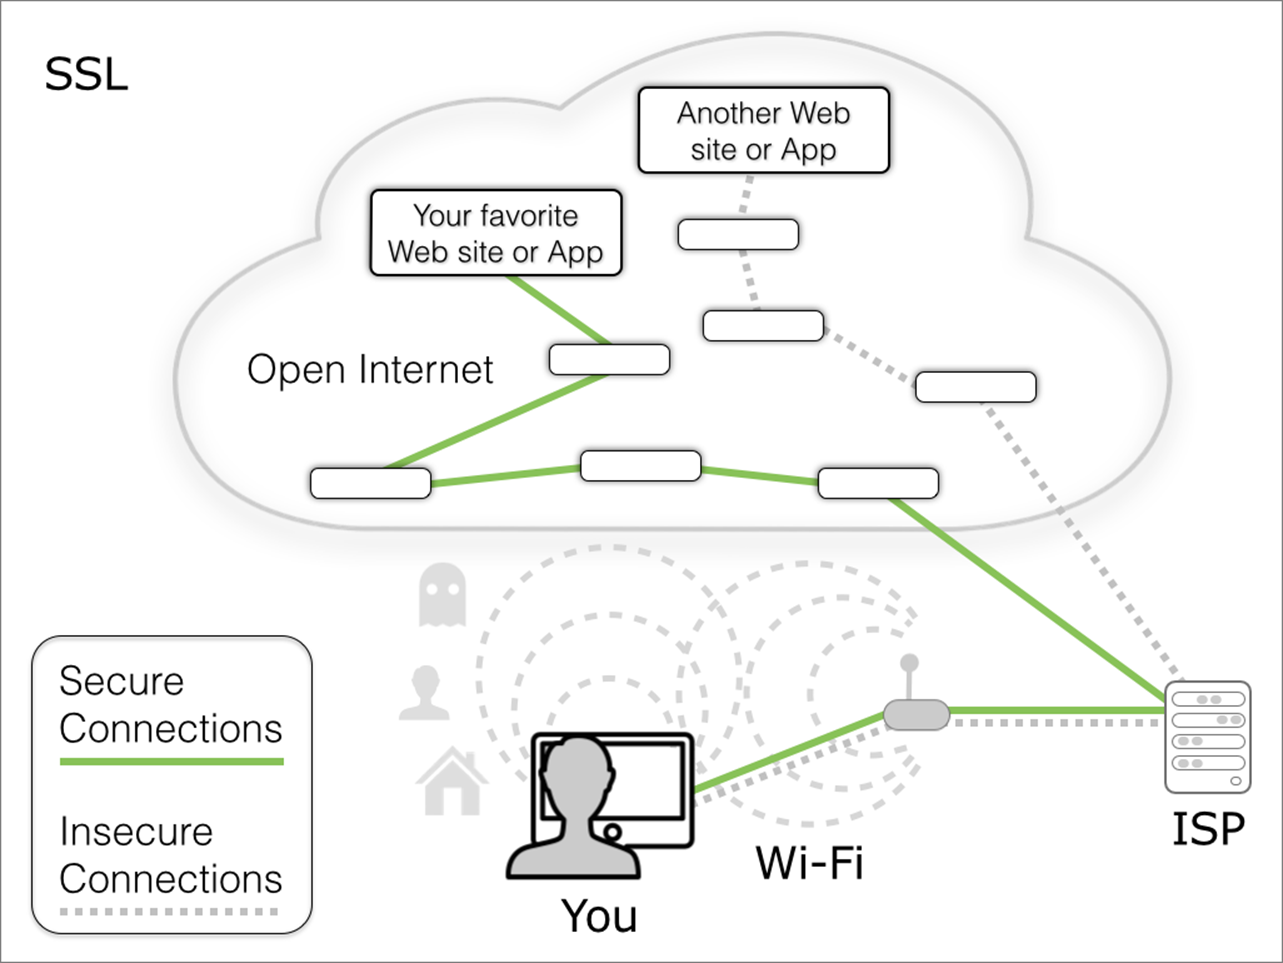 **Figure 6:** Using SSL encrypts an entire communications channel between your device and a particular remote computer. But other insecure connections may be active at the same time.